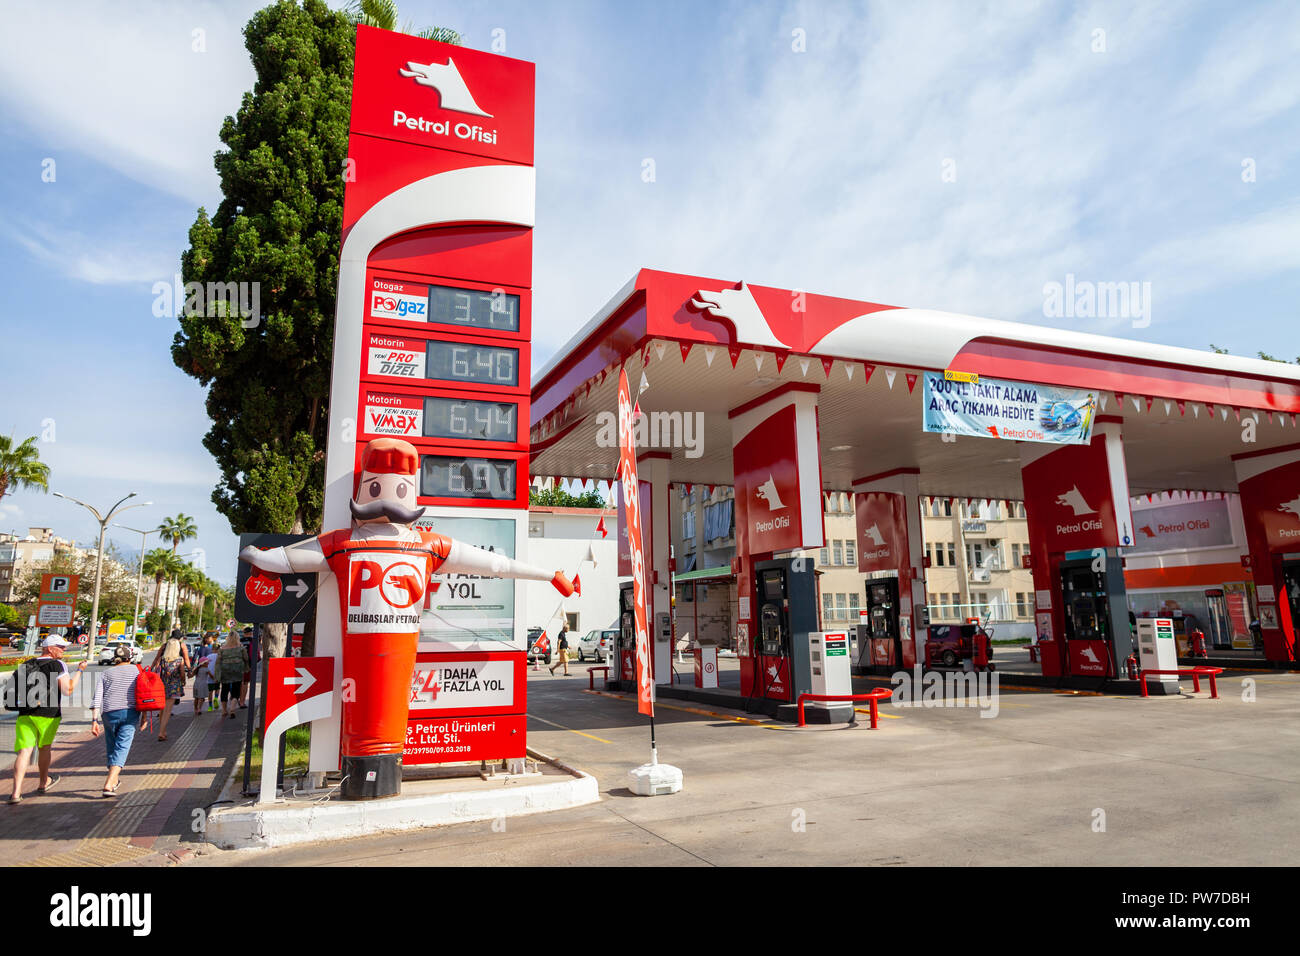 ANTALYA / TURKEY - SEPTEMBER 30,2018: Petrol Ofisi gasoline station. Petrol Ofisi is a Turkish fuel products distribution and lubricants company. Stock Photo